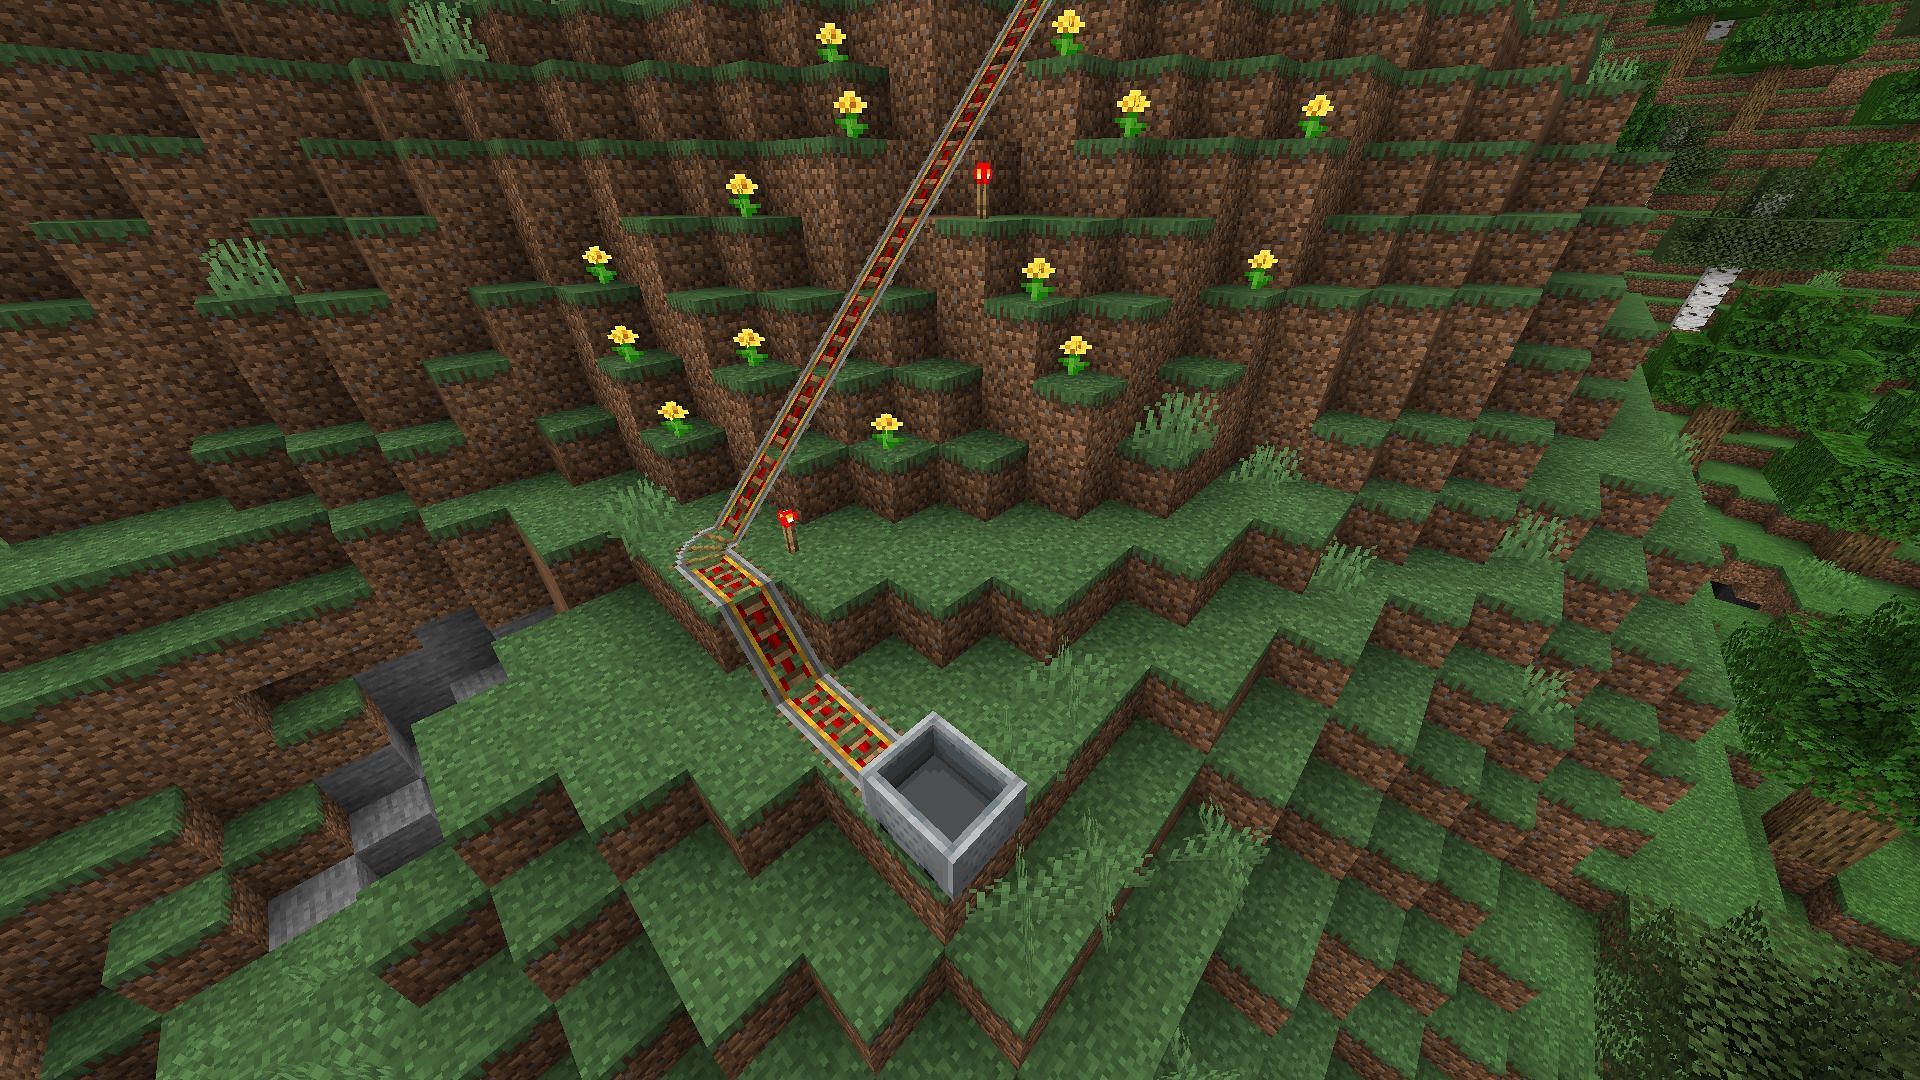 Rail system to push villagers up a hill in Minecraft (Image via Mojang)